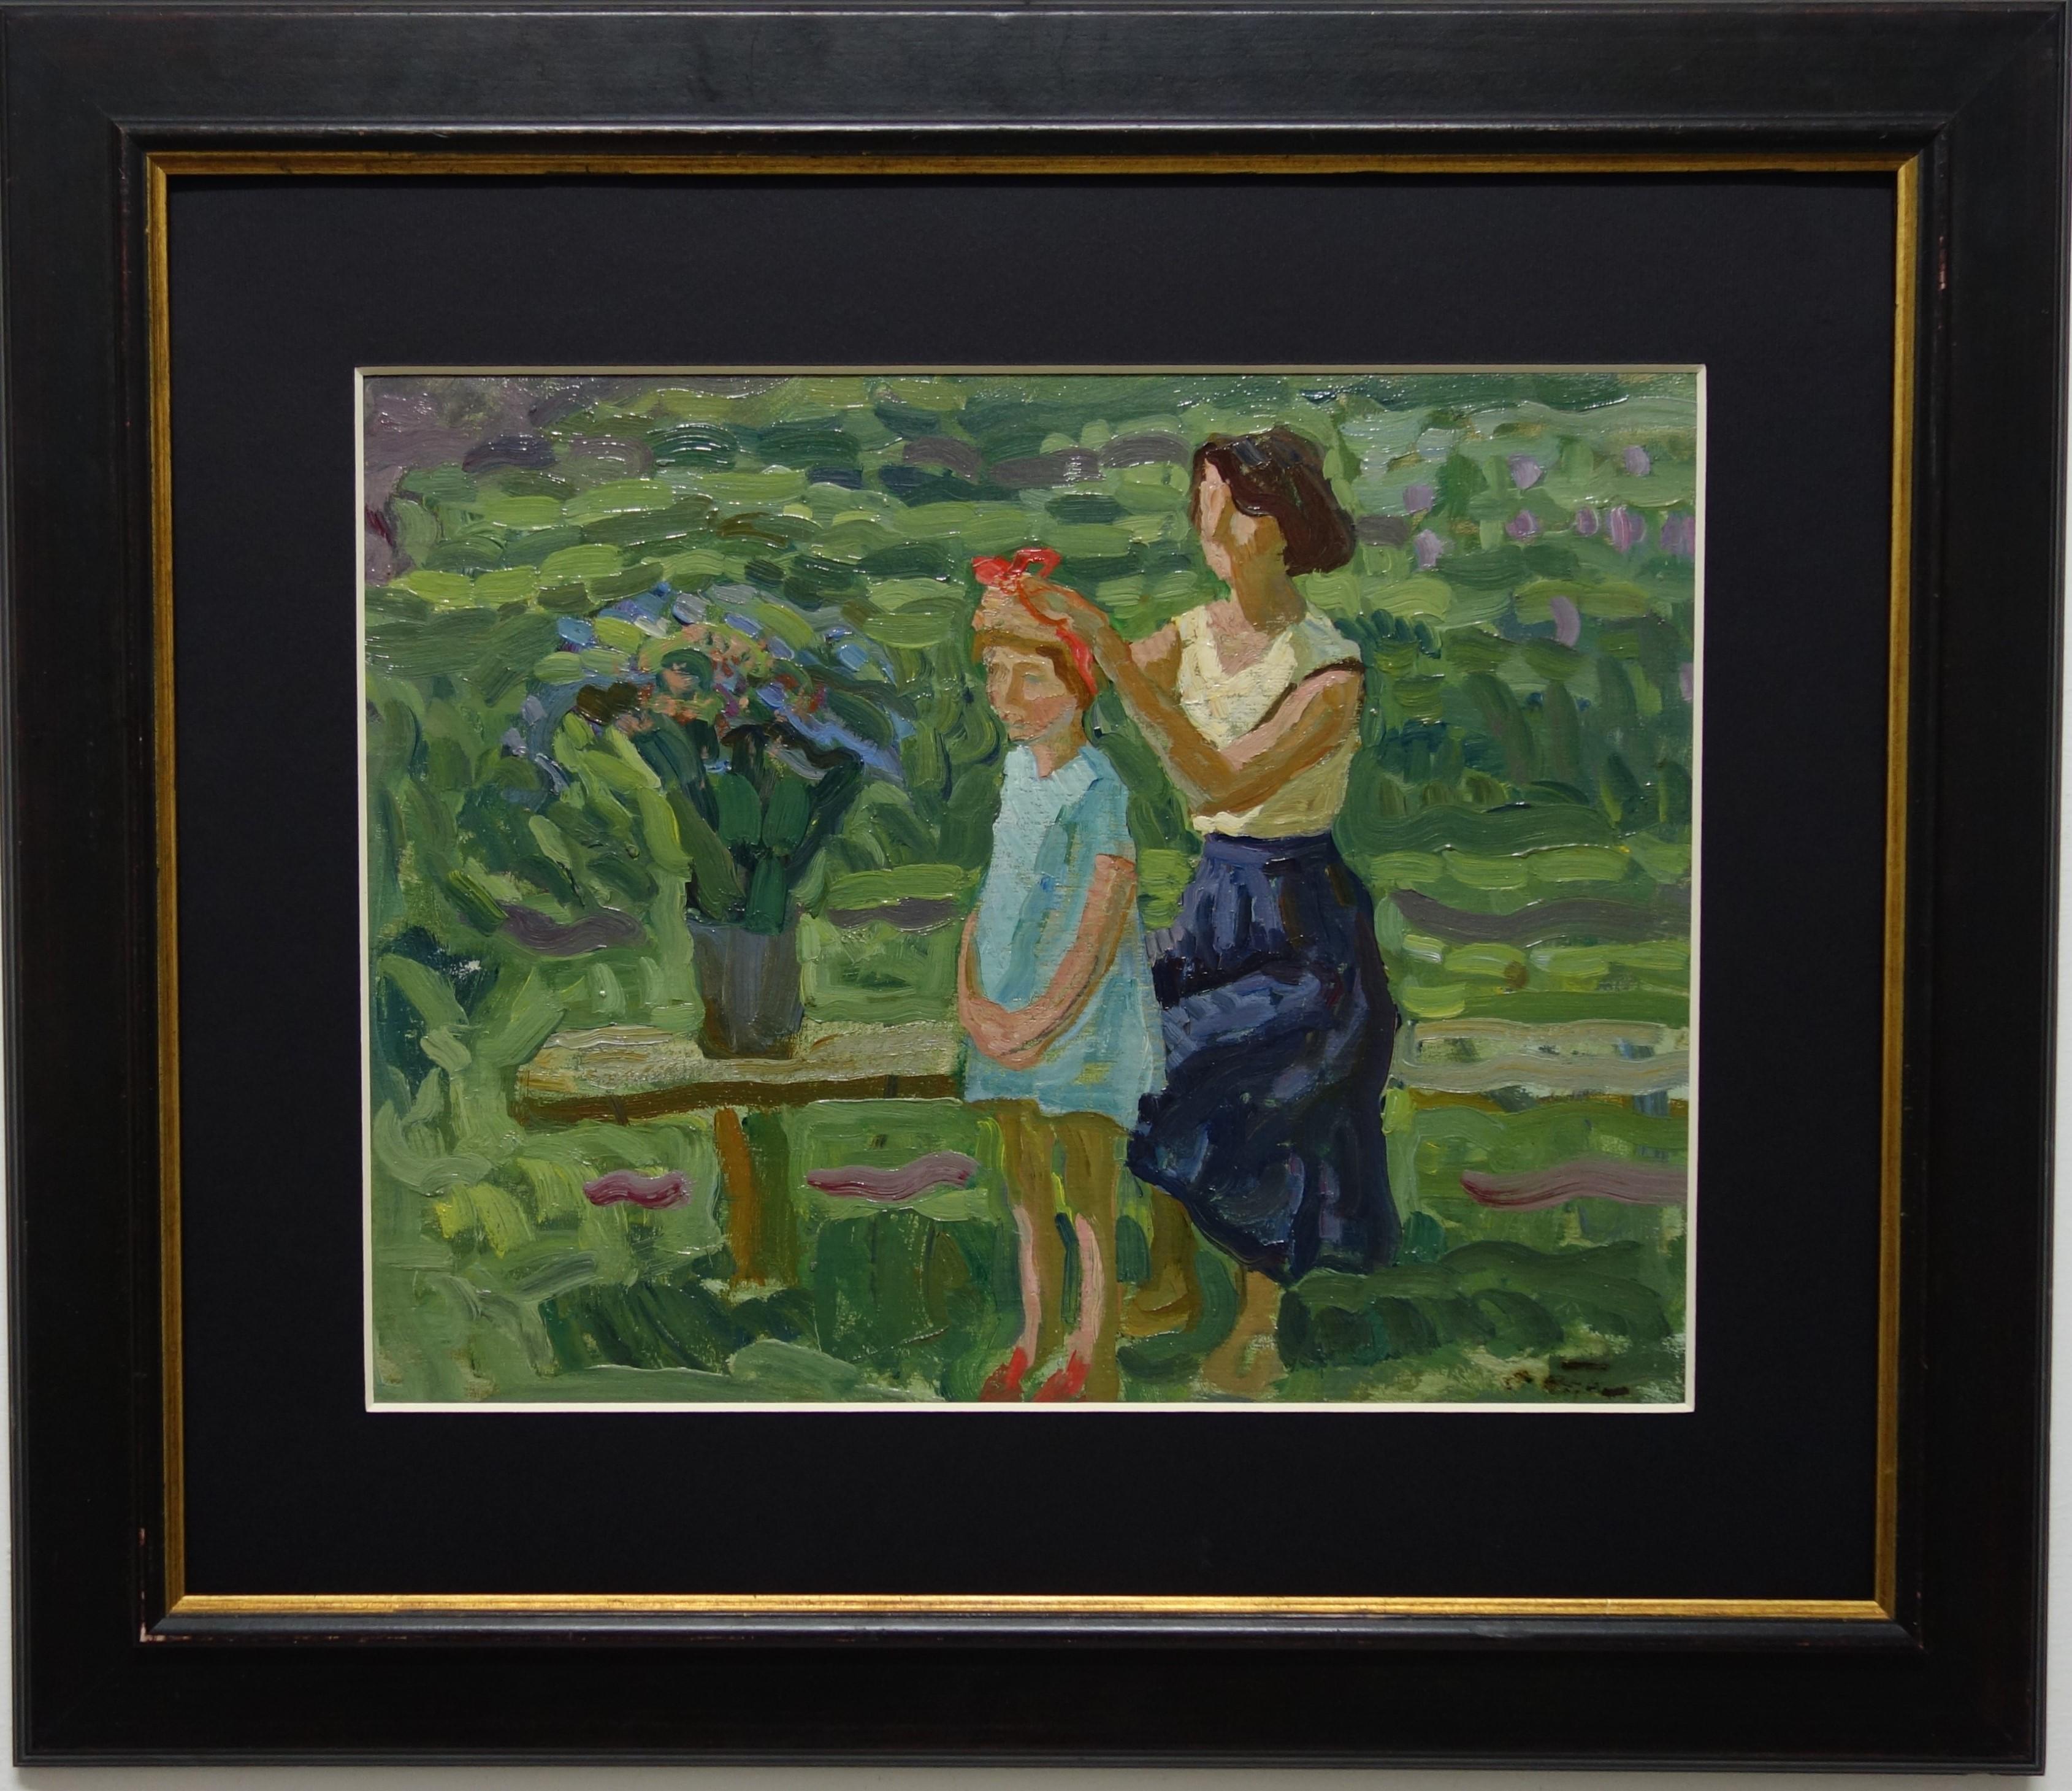 Aleksei and Sergei Tkachev Figurative Painting - "The braid " Mother's Day, Little Girl, Child  Oil  cm. 44 x 34  1984